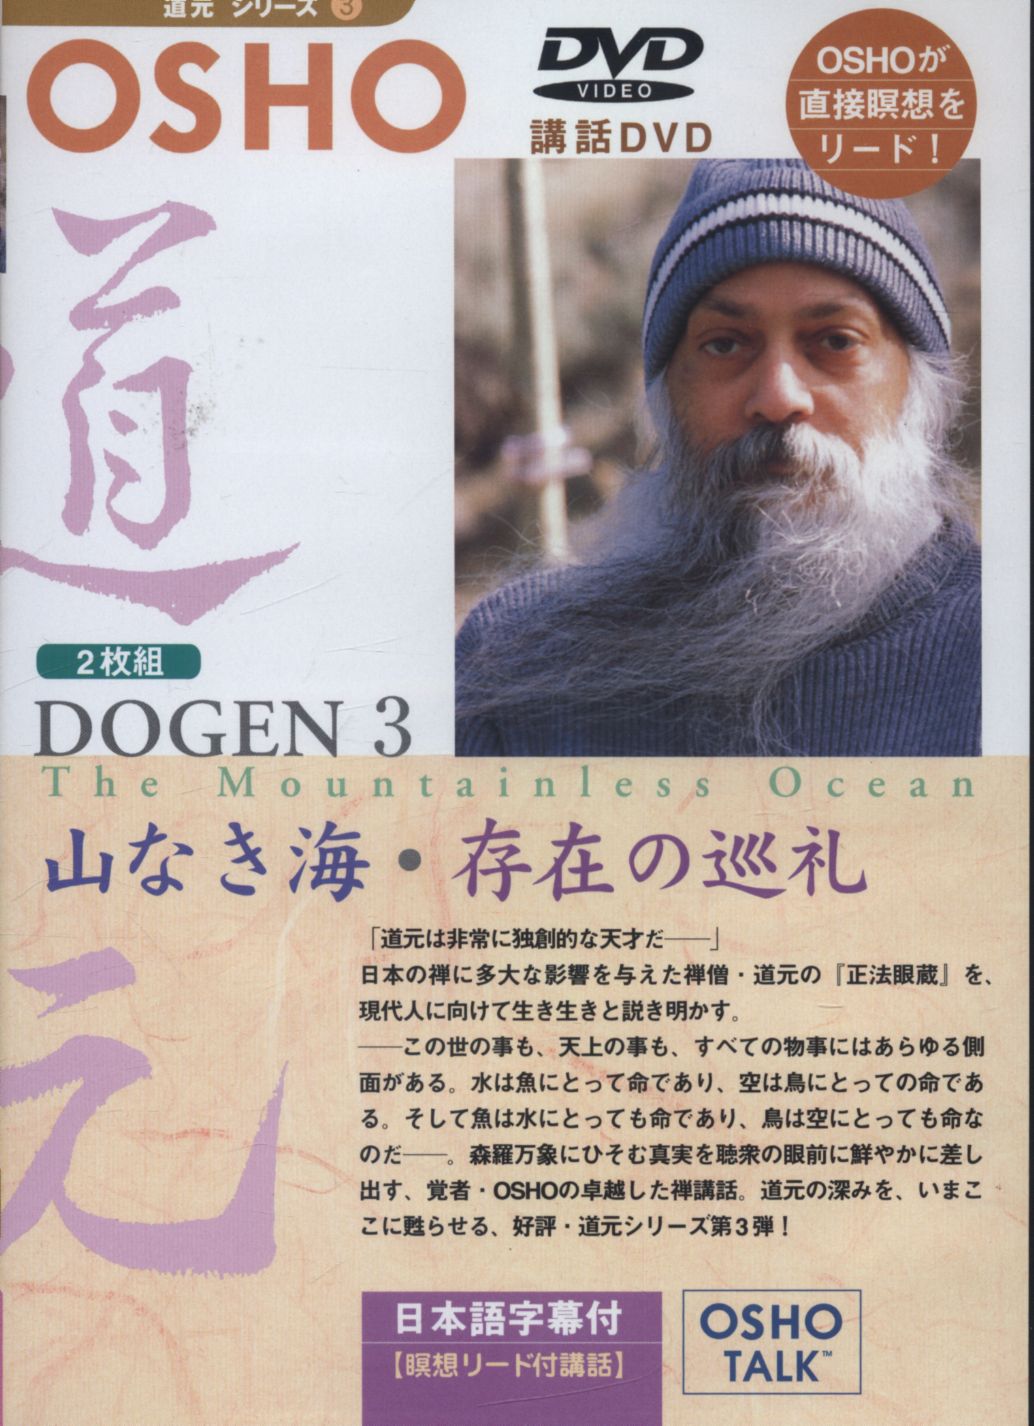 Lecture Dvd Dogen Series 3 Osho Mountain Defunct Sea Pilgrimage Of Existence Mandarake 在线商店